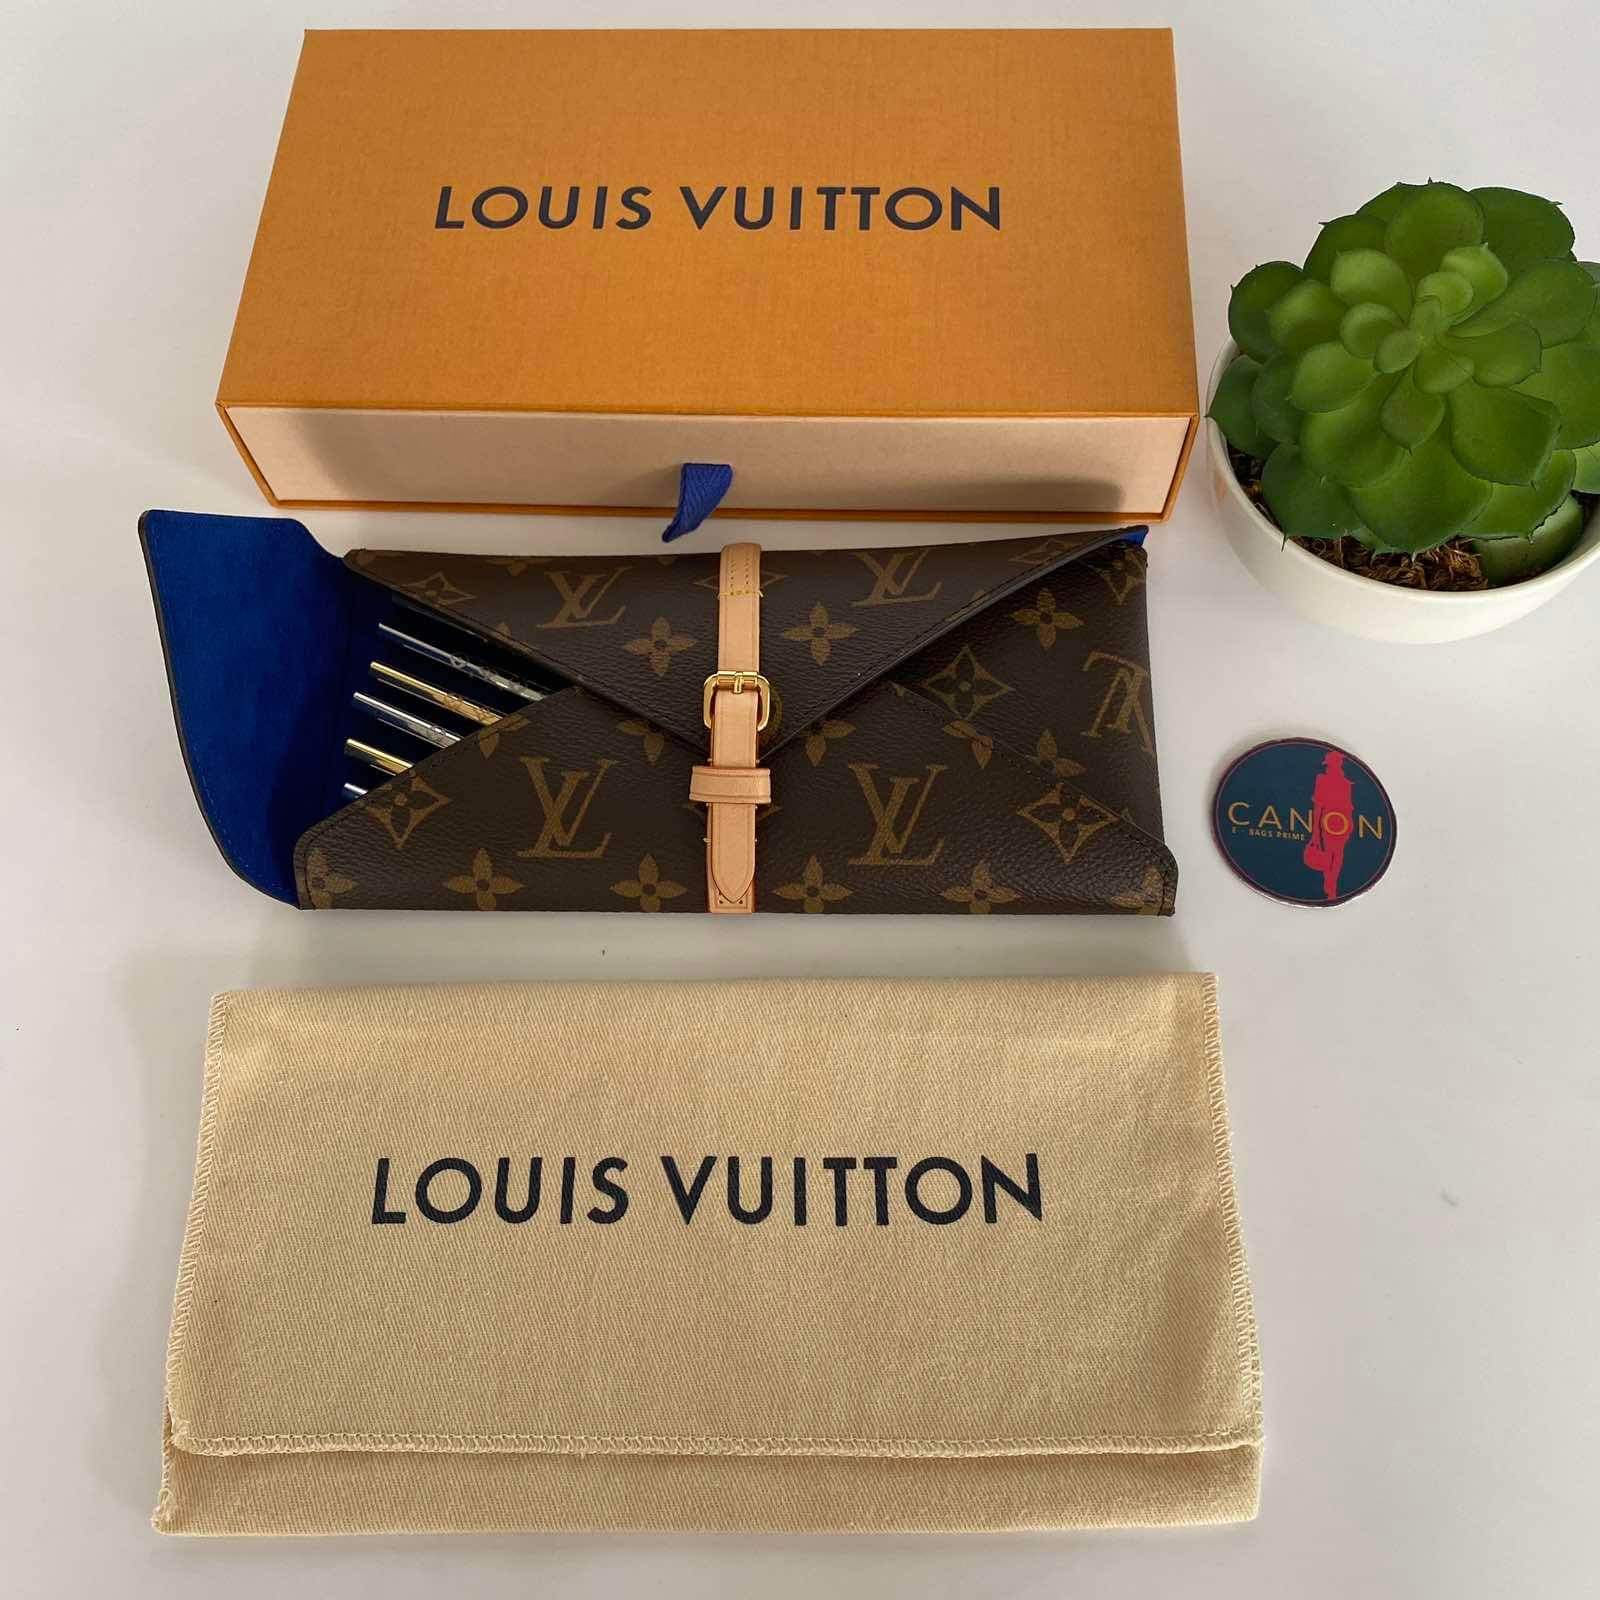 Louis Vuitton Monogram Straws & Pouch. Made in France.